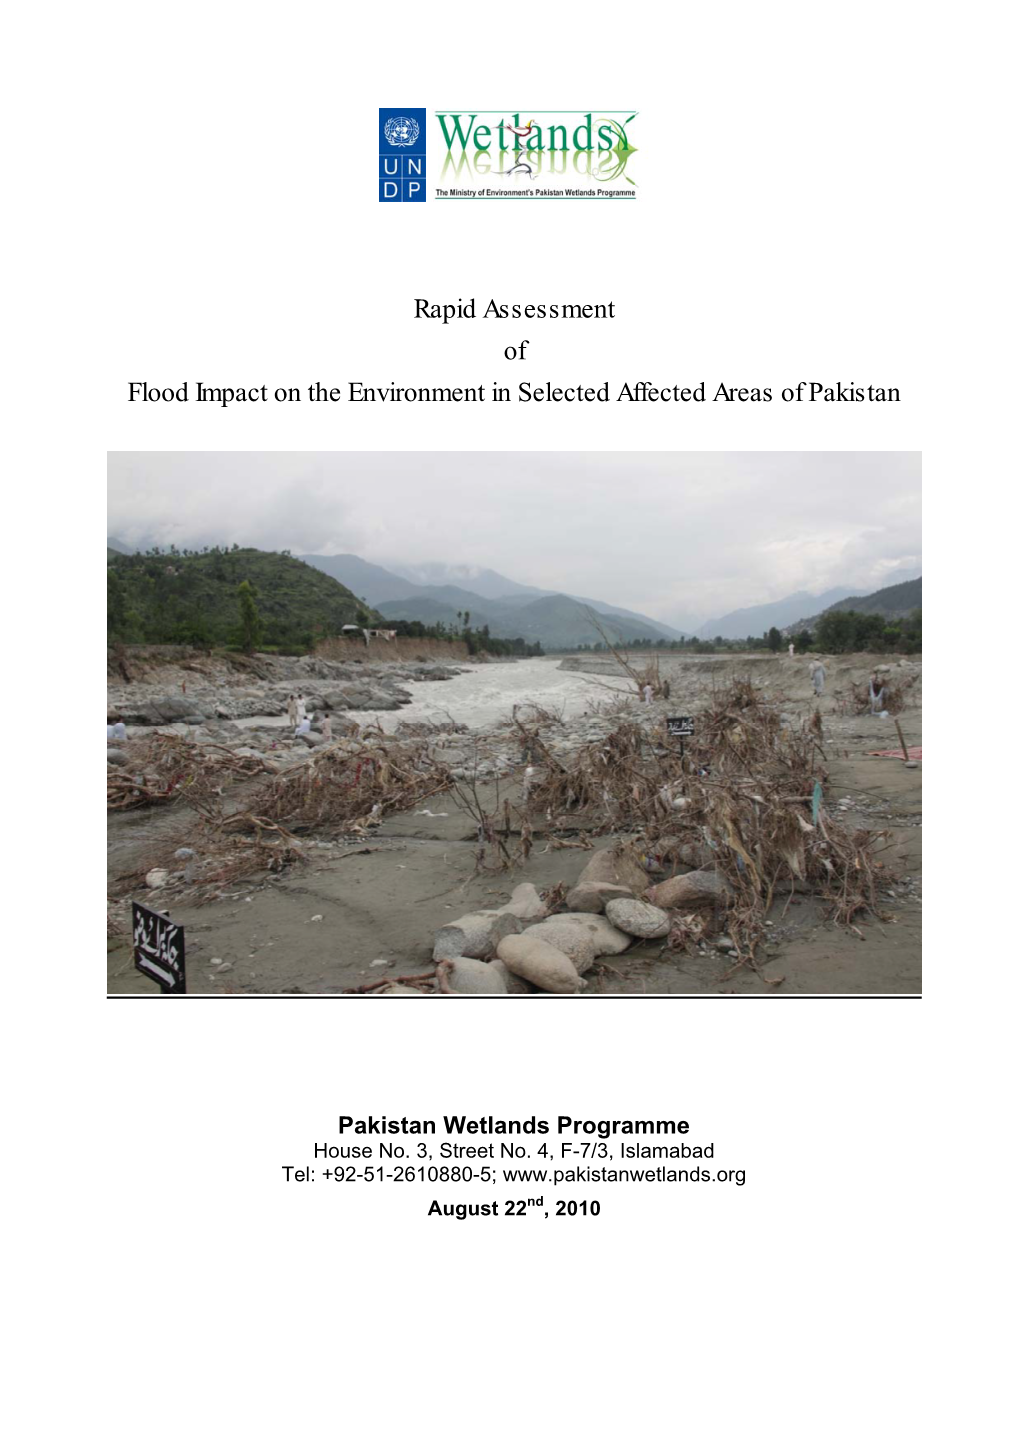 Environmental Impacts of Floods in CIWC